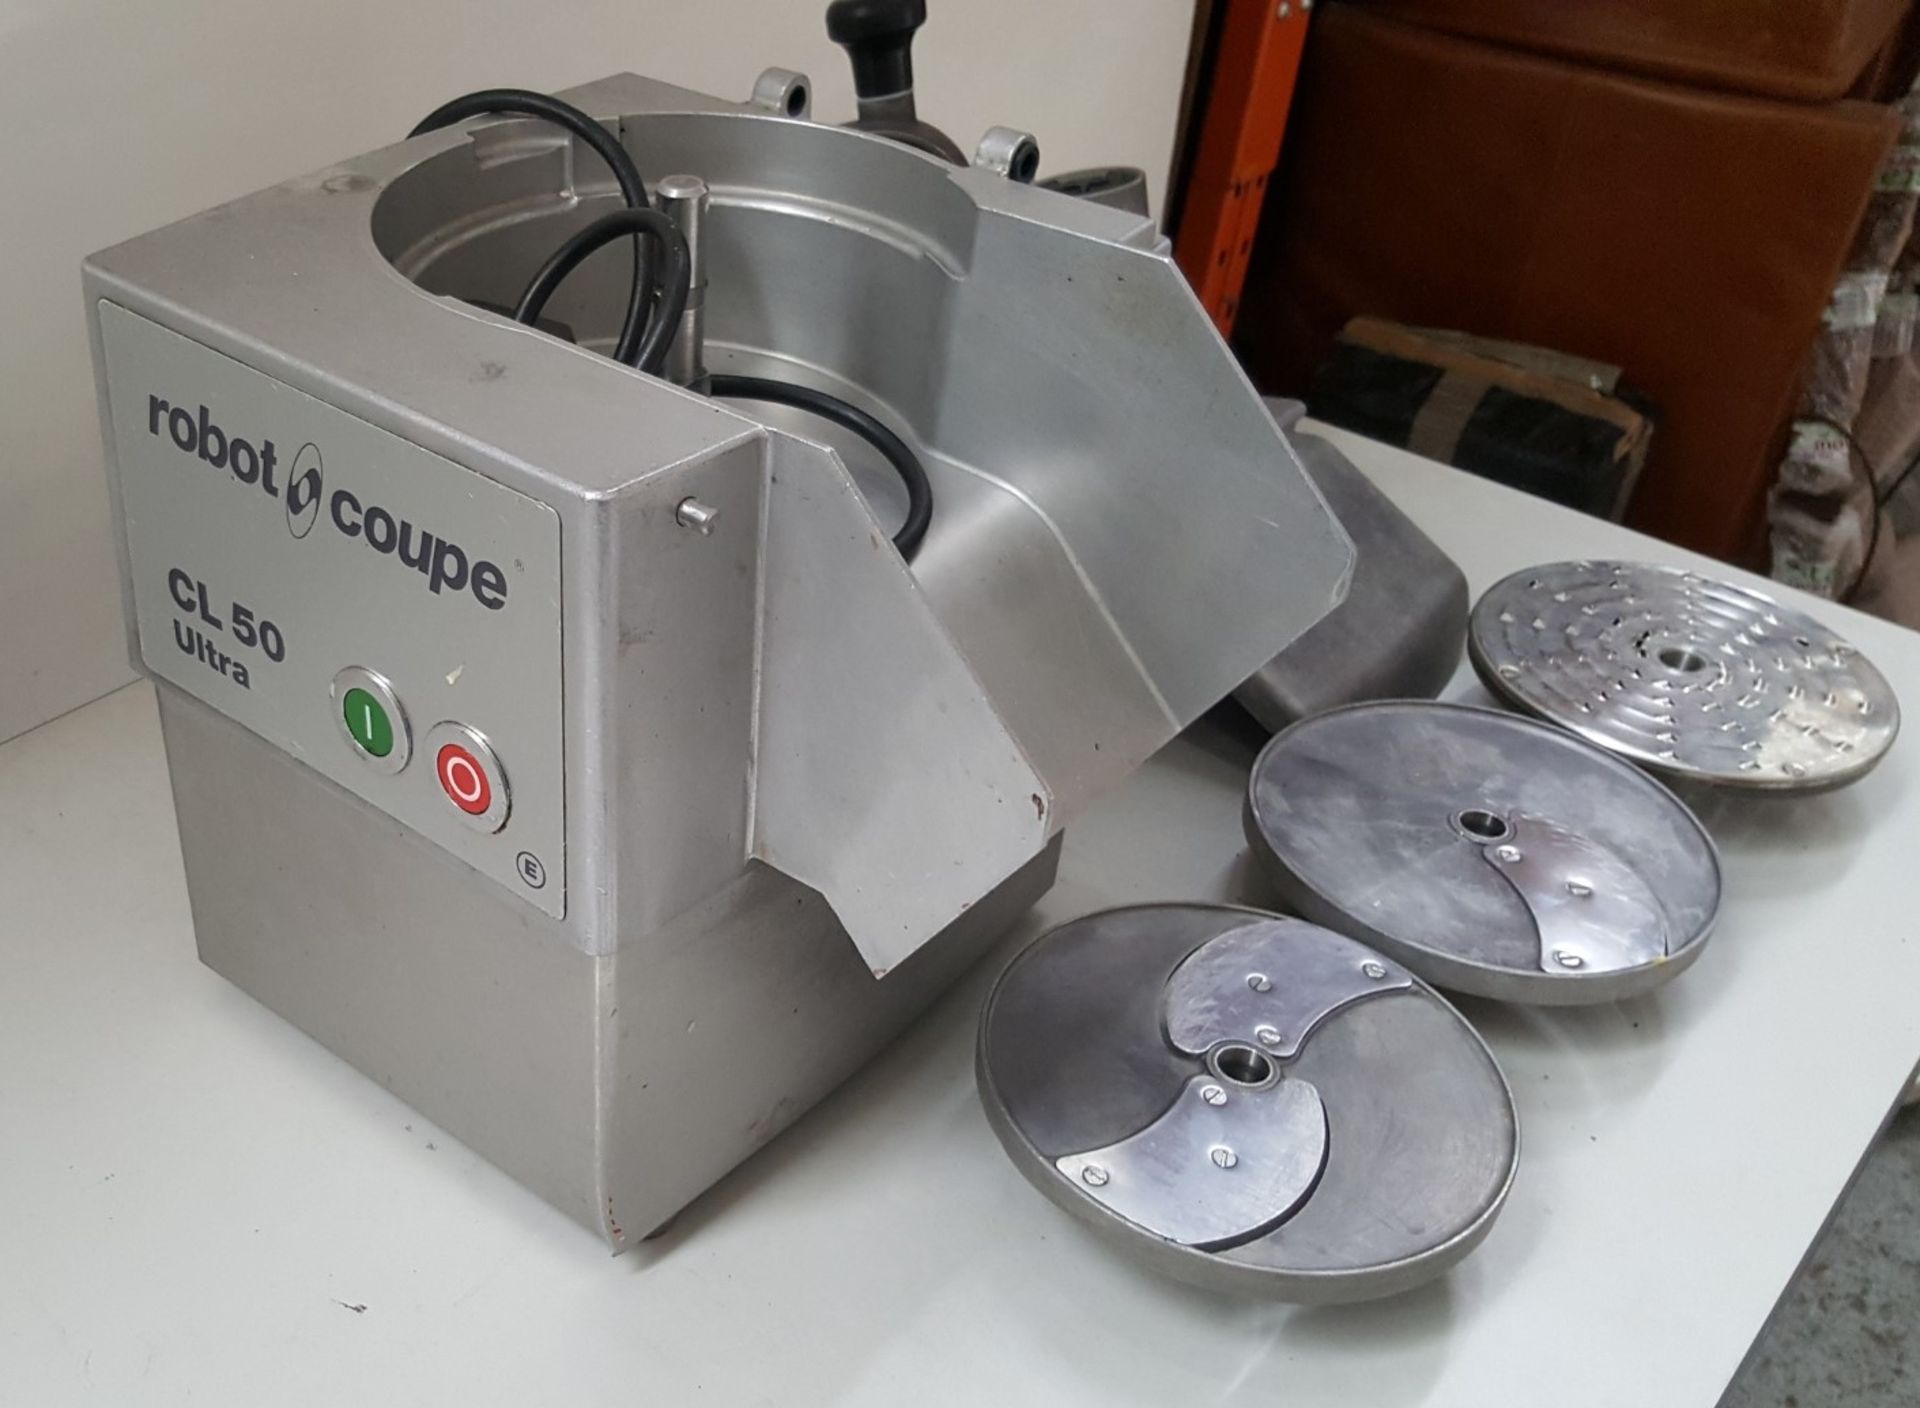 1 x Robot Coupe CL 50 Vegetable Preparation Machine - Ref CQ108 - Image 3 of 5